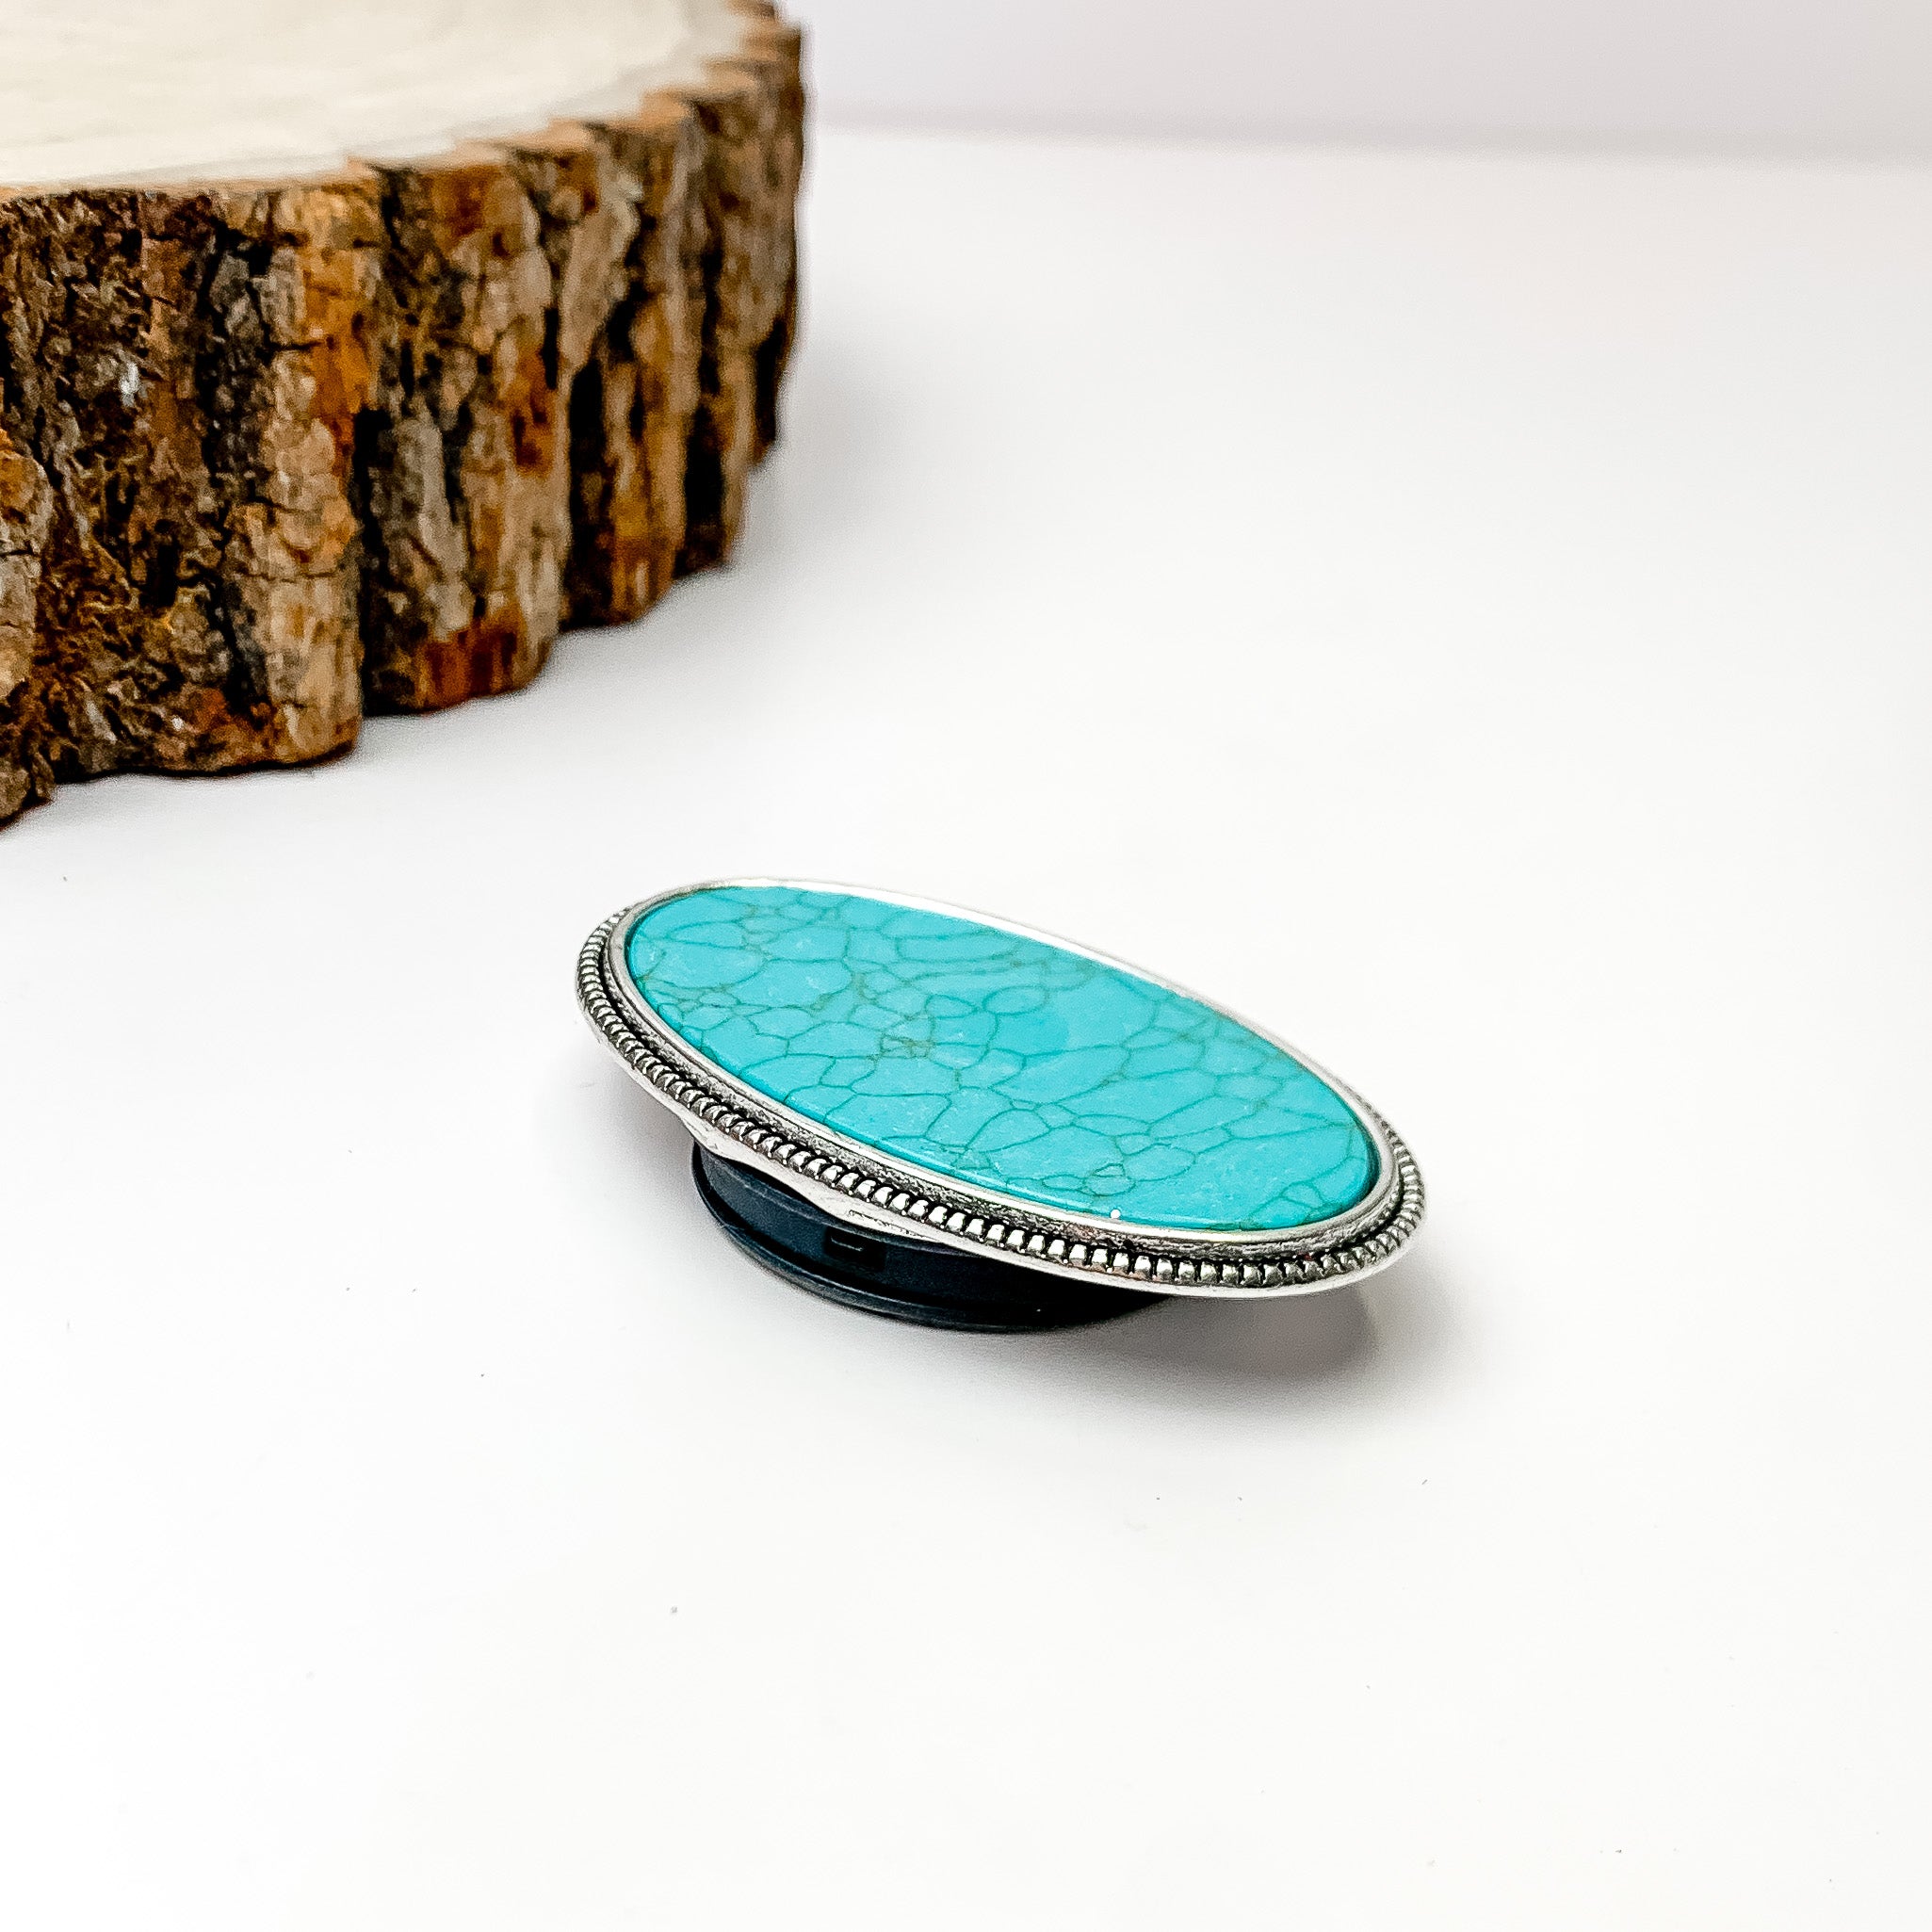 Turquoise Stone With Silver Tone Trim Oval Phone Grip - Giddy Up Glamour Boutique